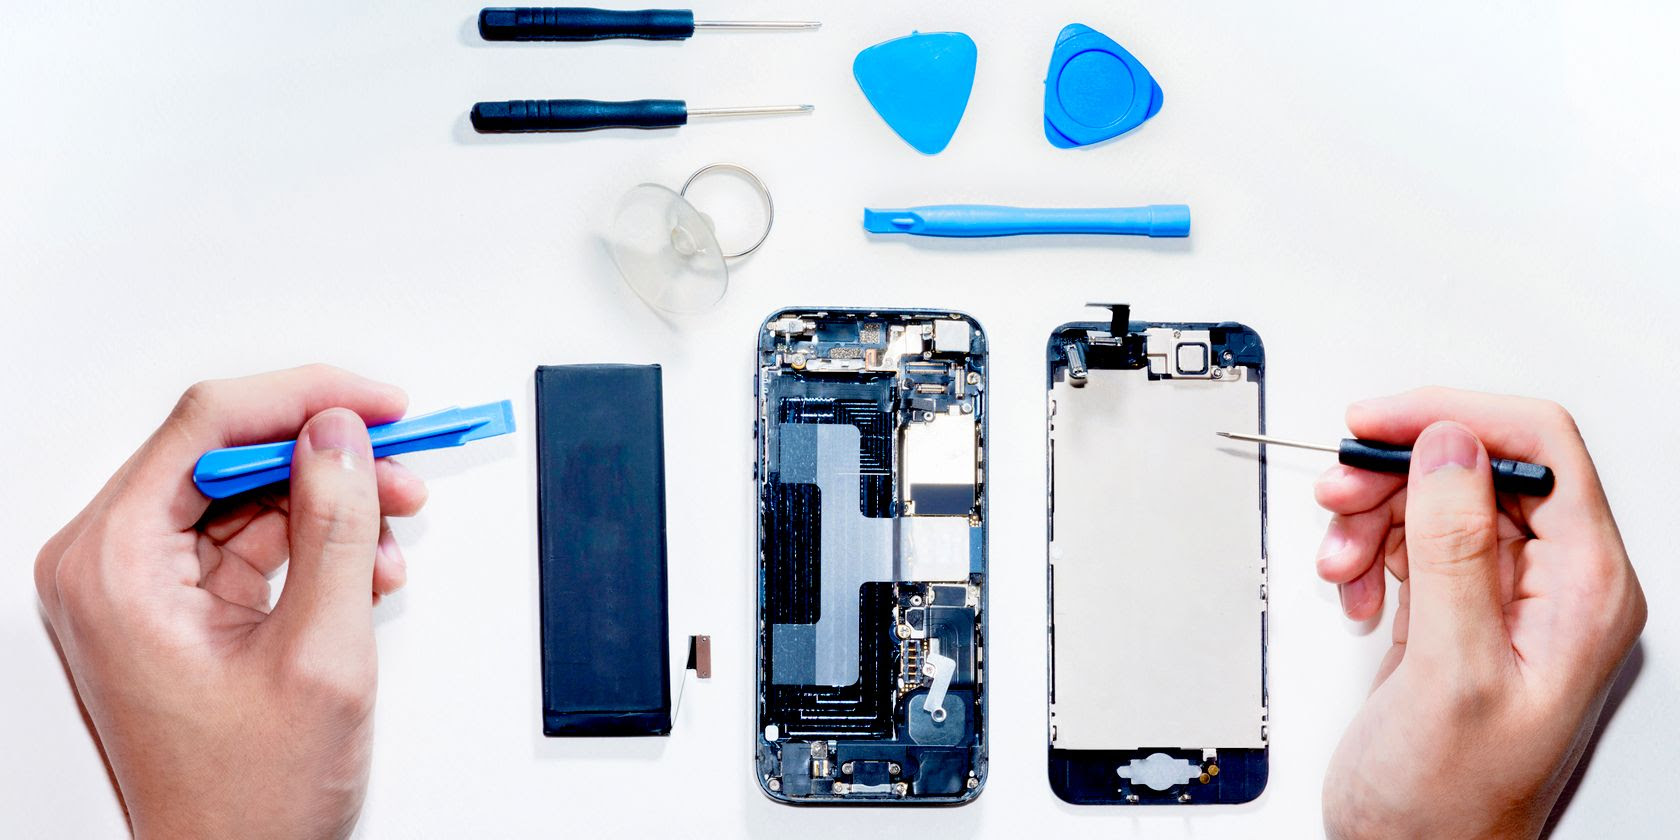 How New York's Right to Repair Bill Could Change Consumer Electronics